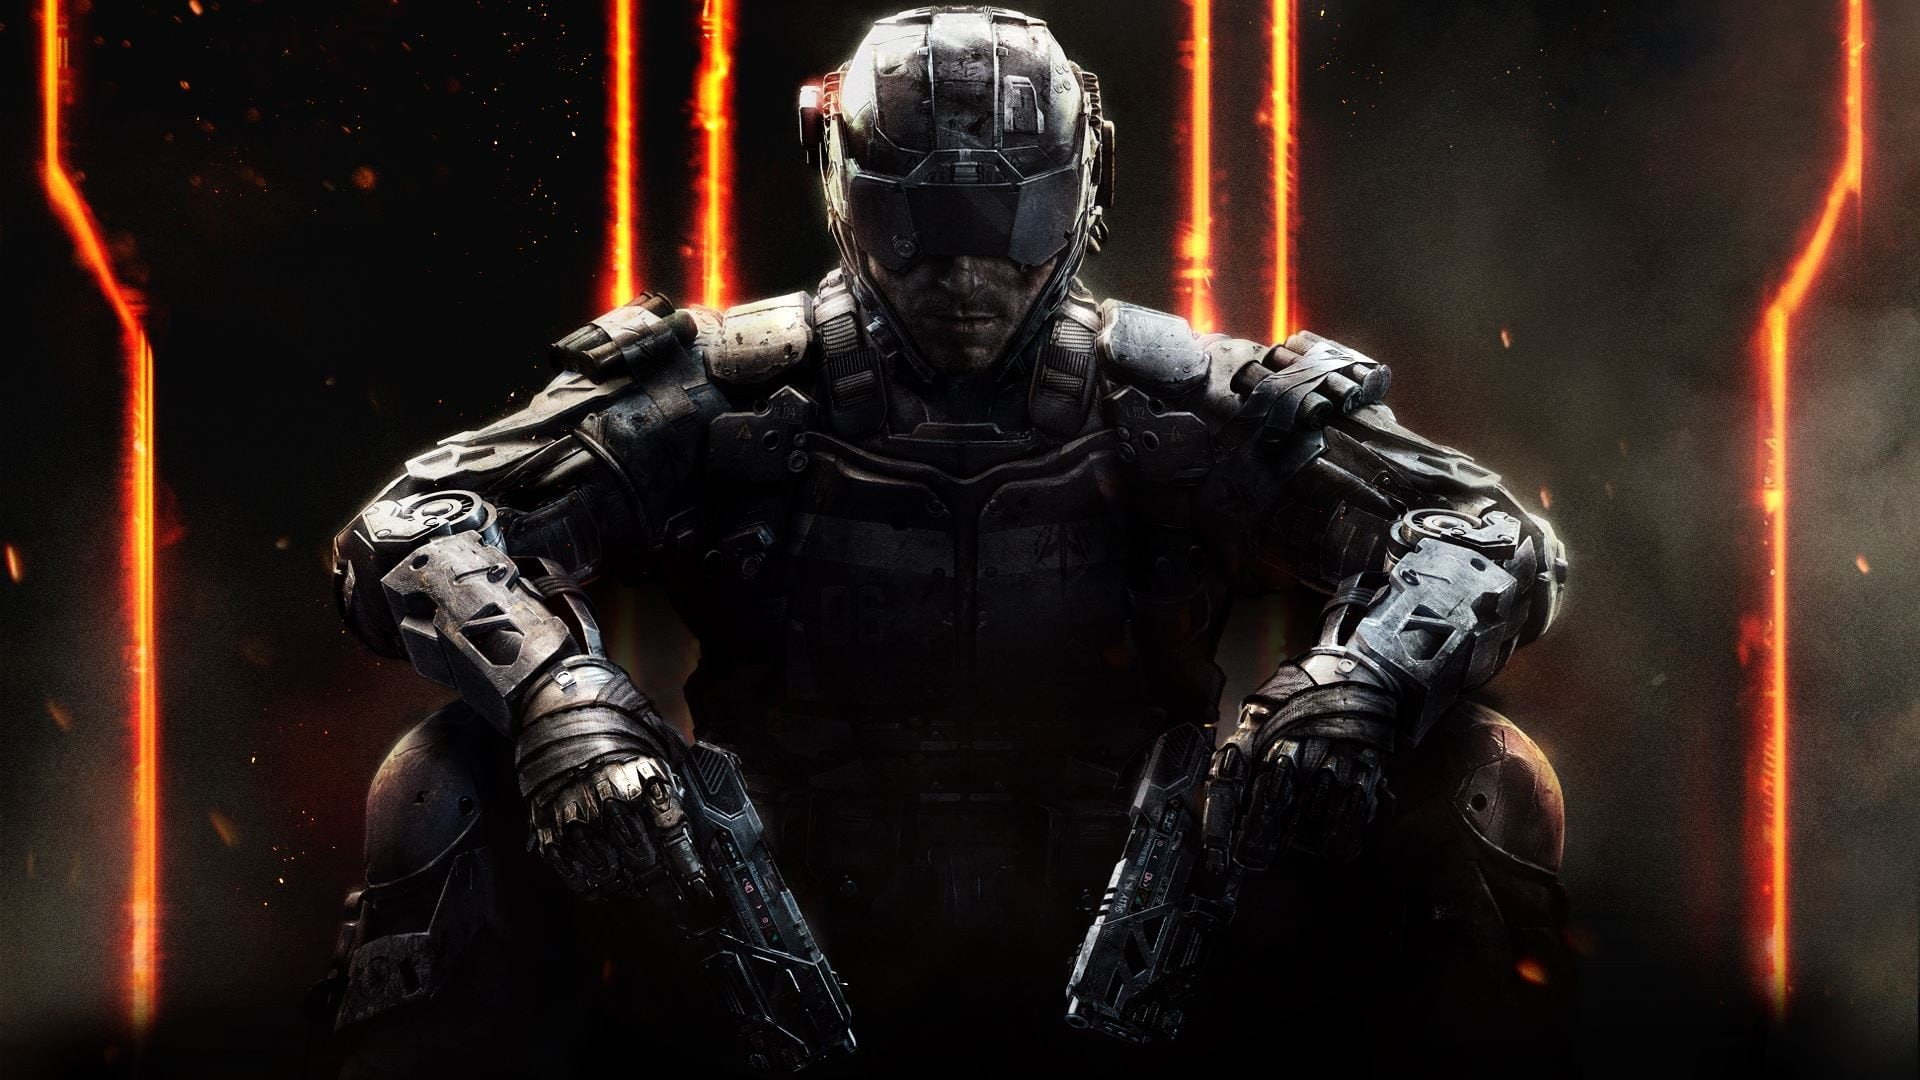 call of duty black ops iii call of duty video games, front view